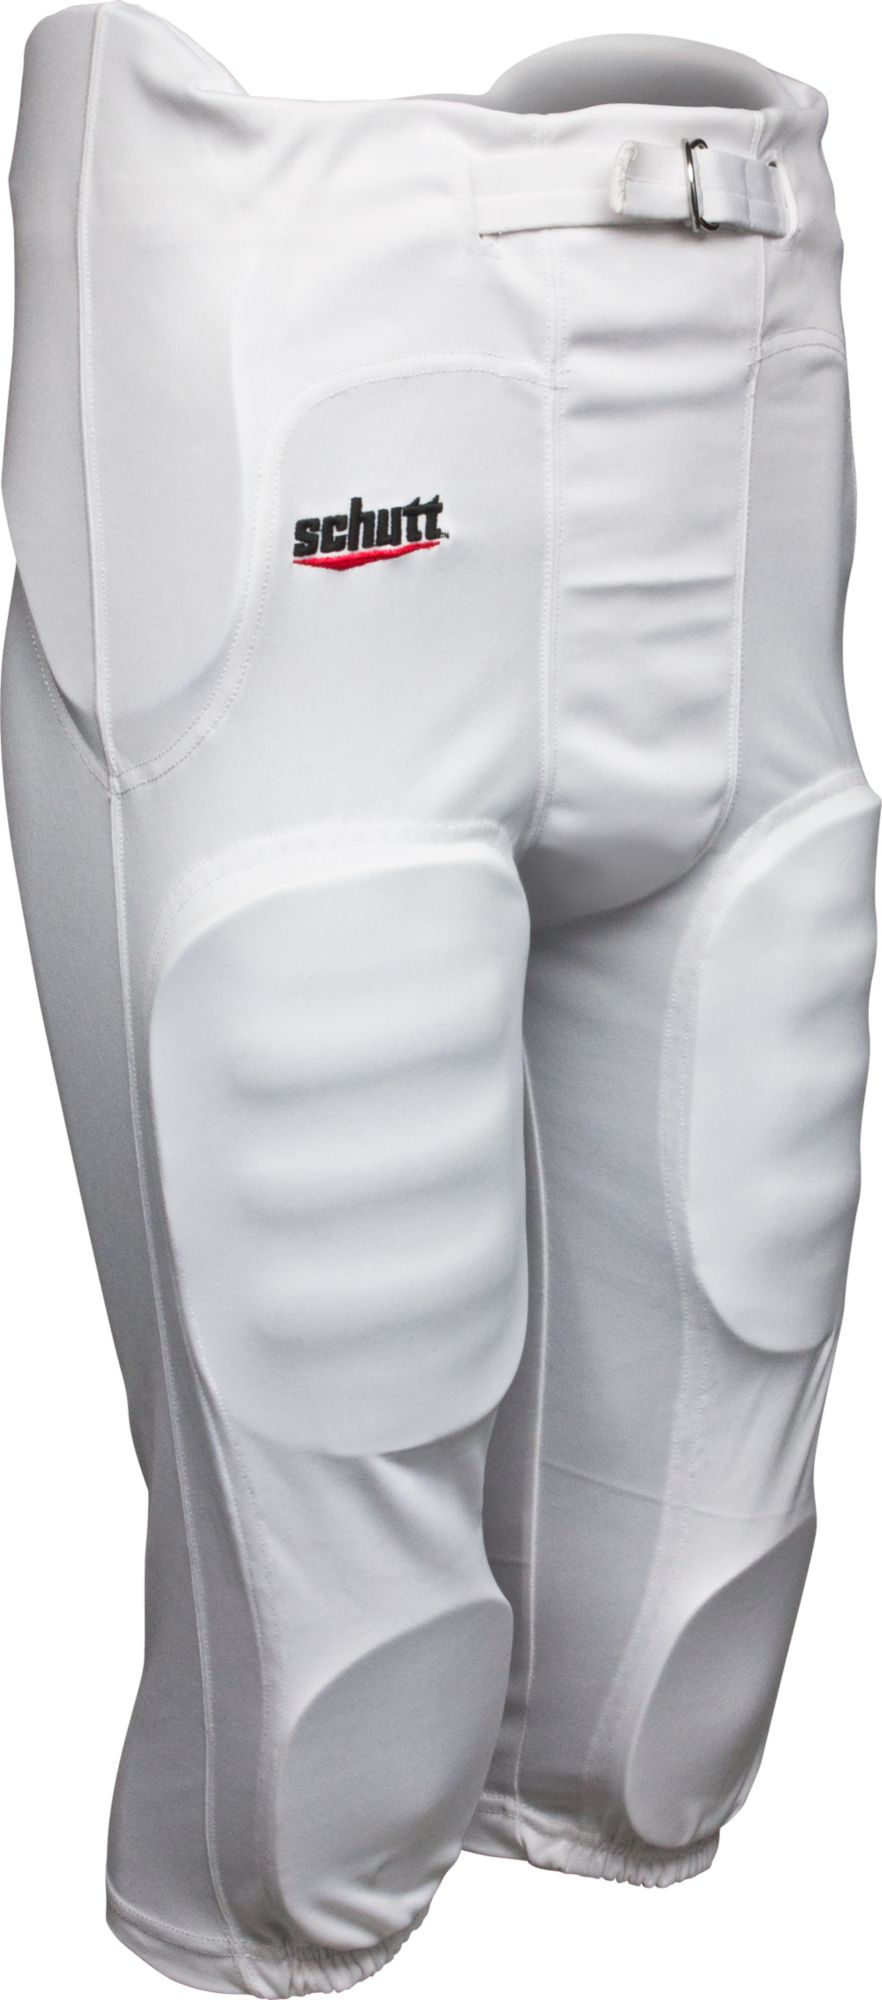 under armor youth football pants